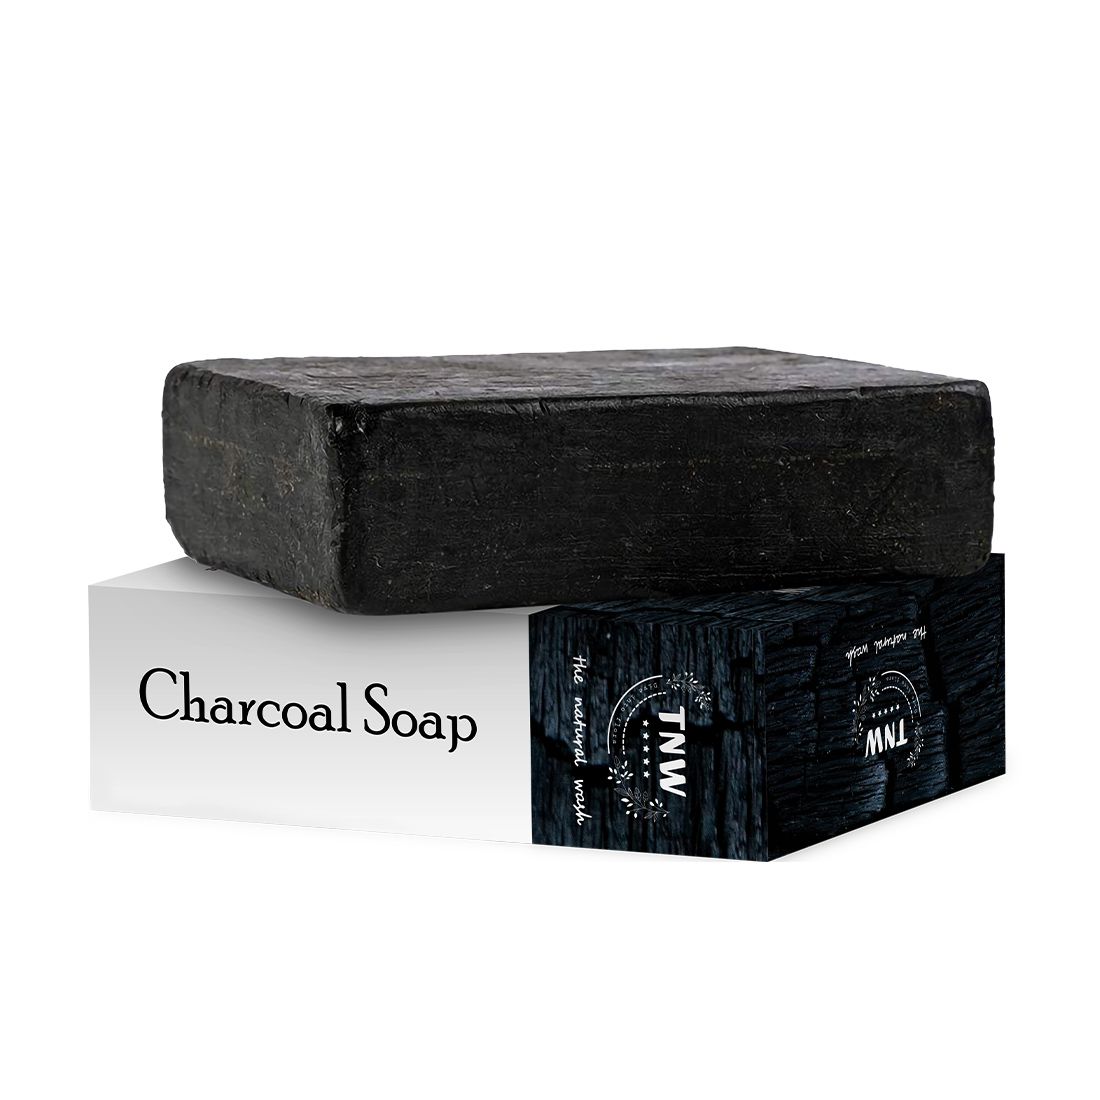     			TNW- The Natural Wash Oily Controlling Charcoal Soap with Activated Charcoal & Neem, 100g